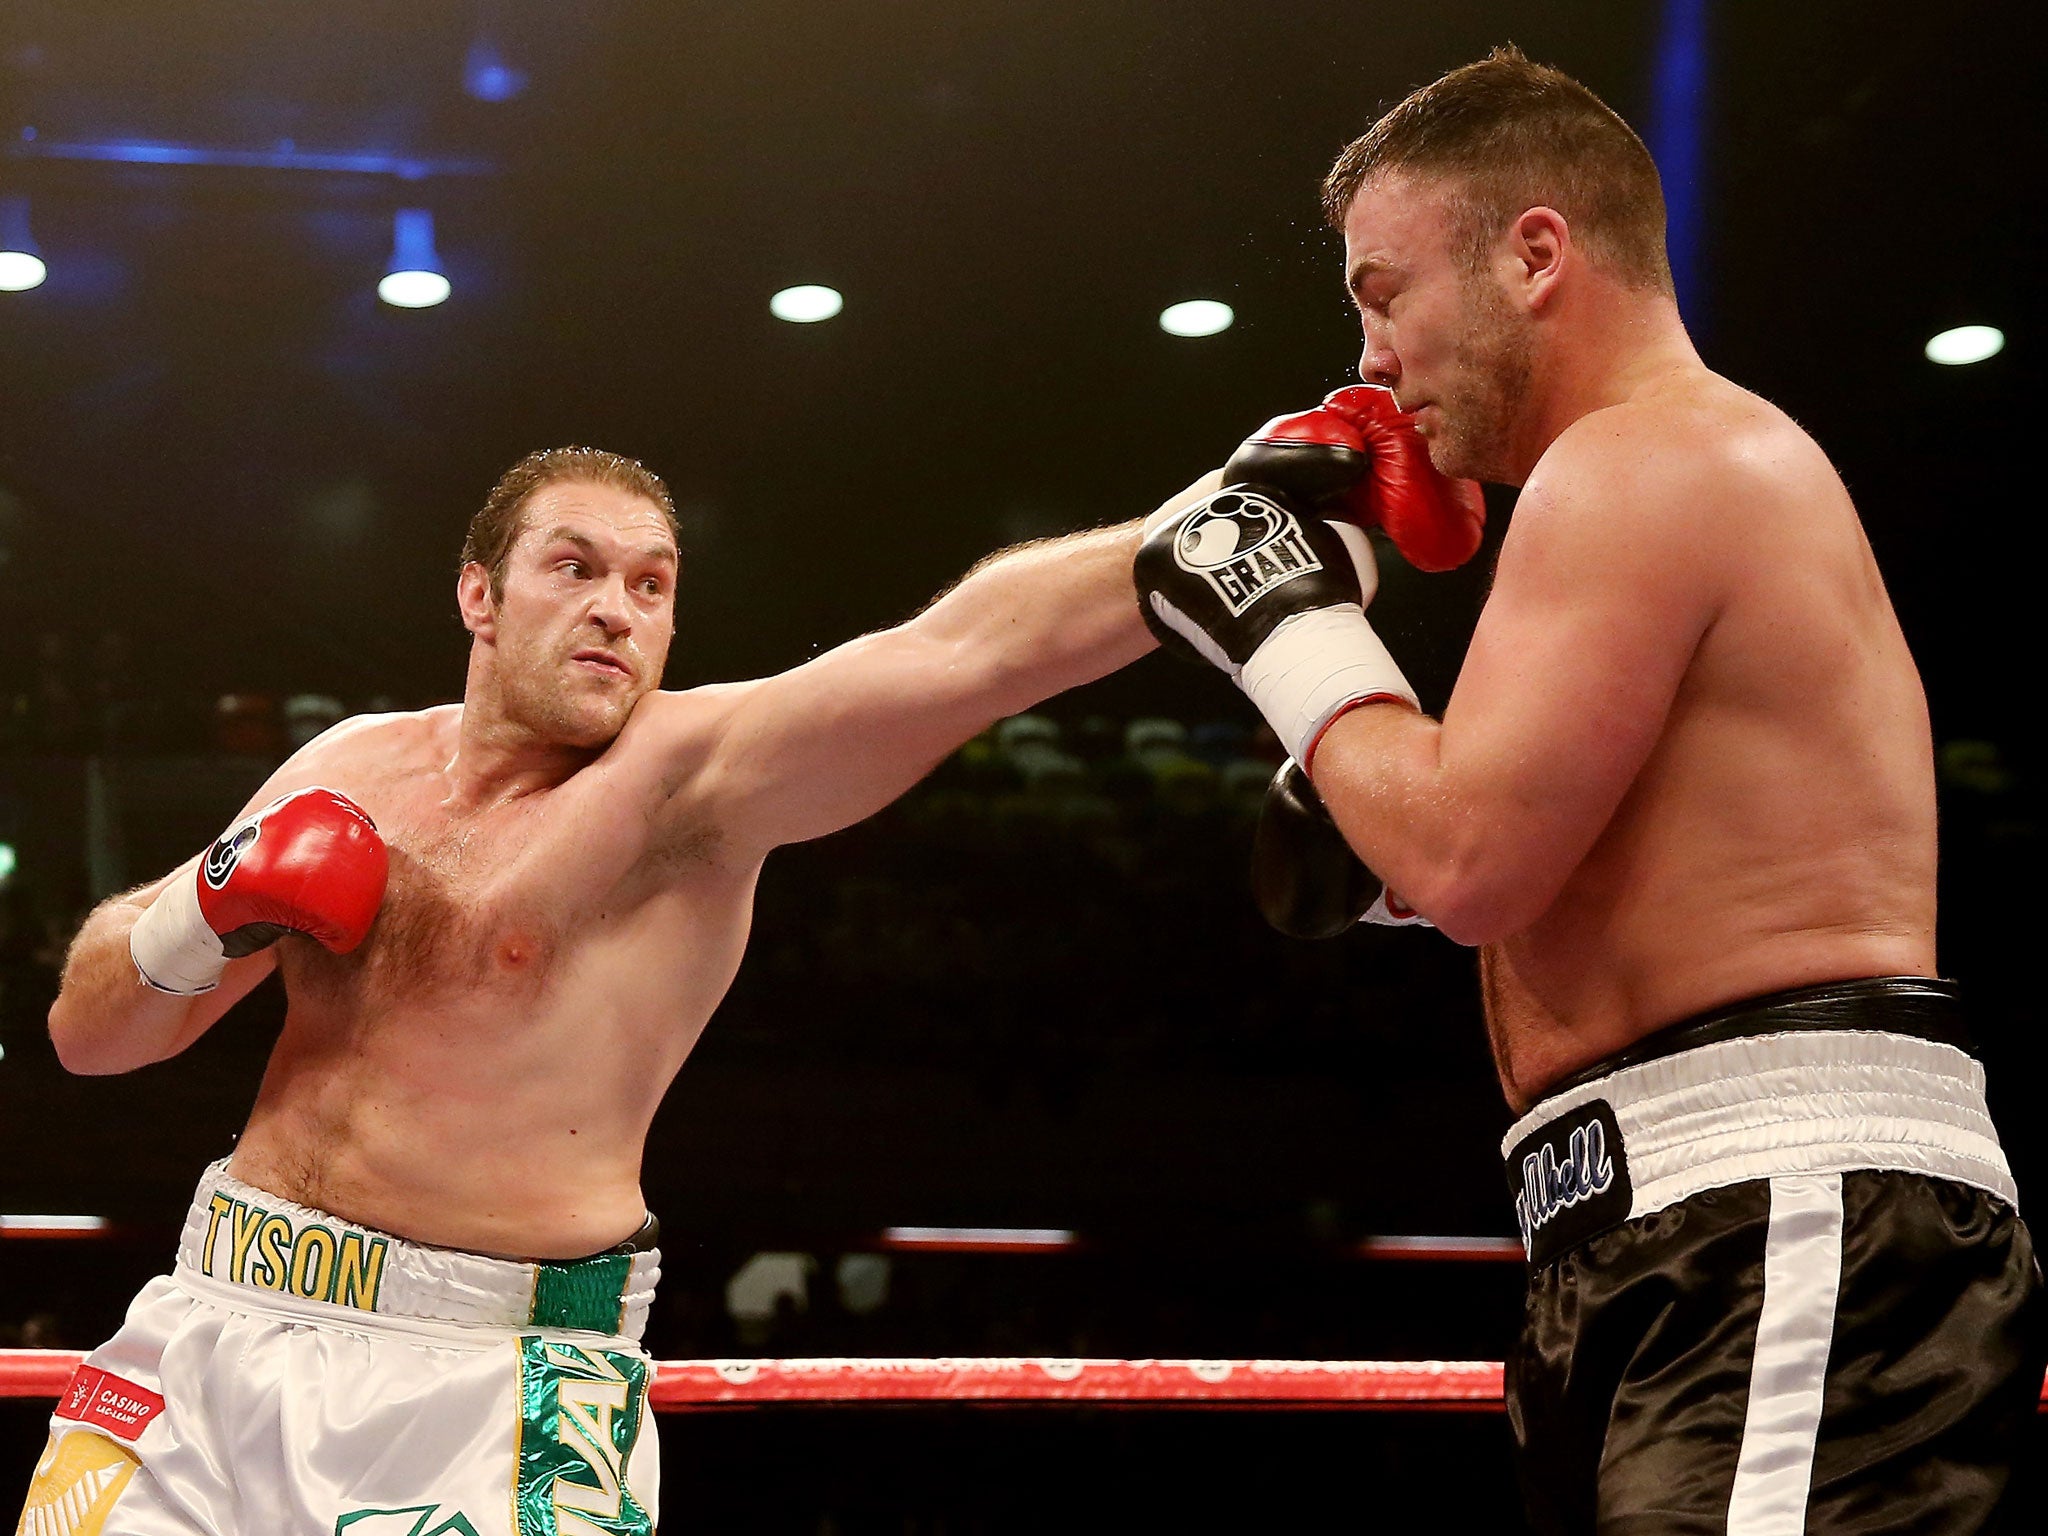 Boxer Tyson Fury angers father of dead teenager with "I'm not a grass